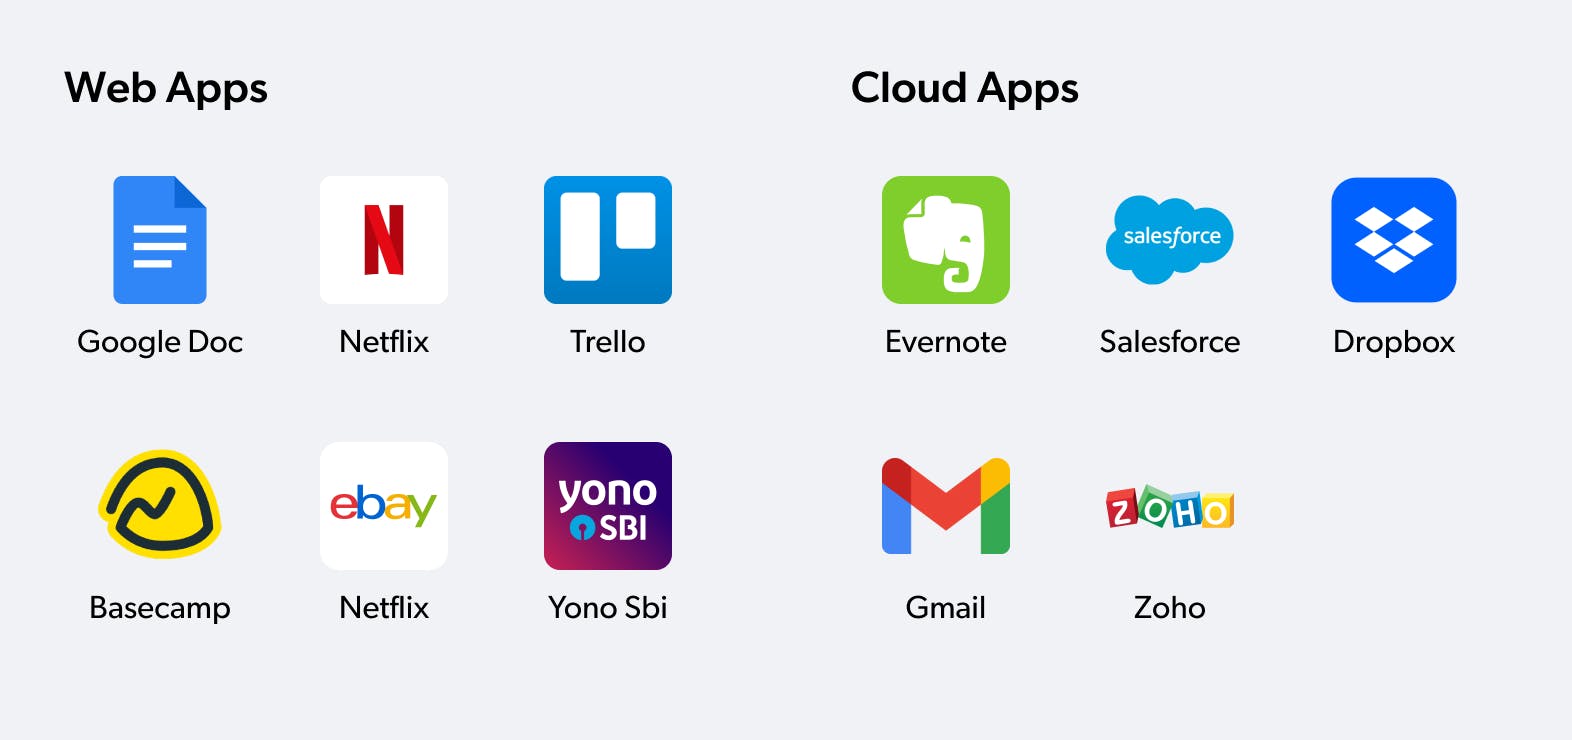 web apps and cloud apps